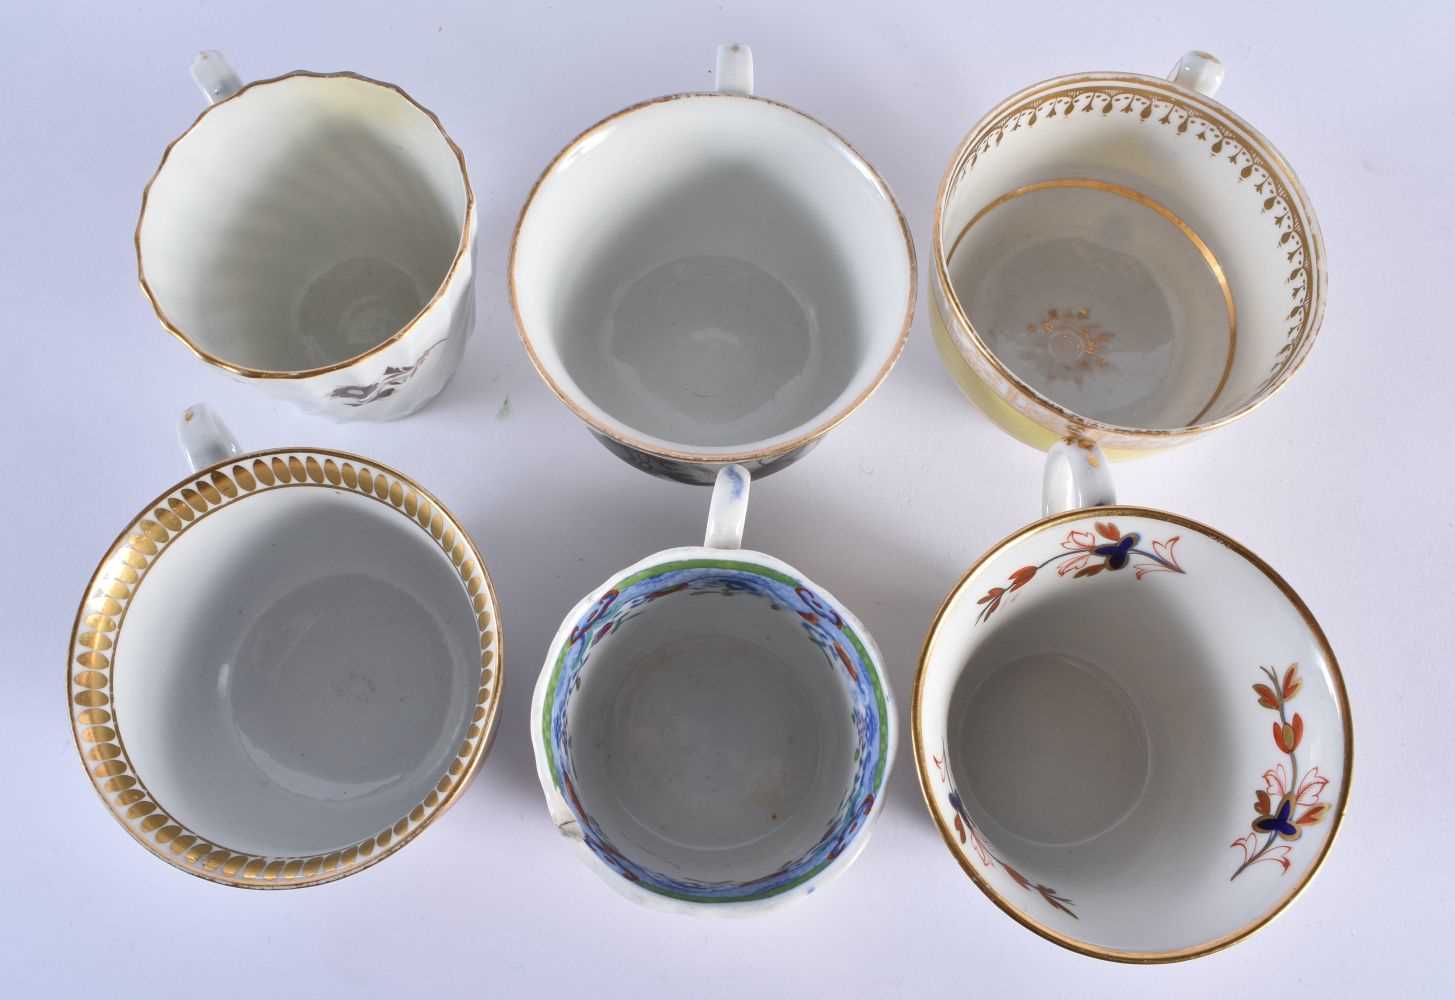 TWELVE LATE 18TH/19TH CENTURY ENGLISH PORCELAIN CUPS including Chmaberlains & Graingers Worcester. - Image 4 of 9